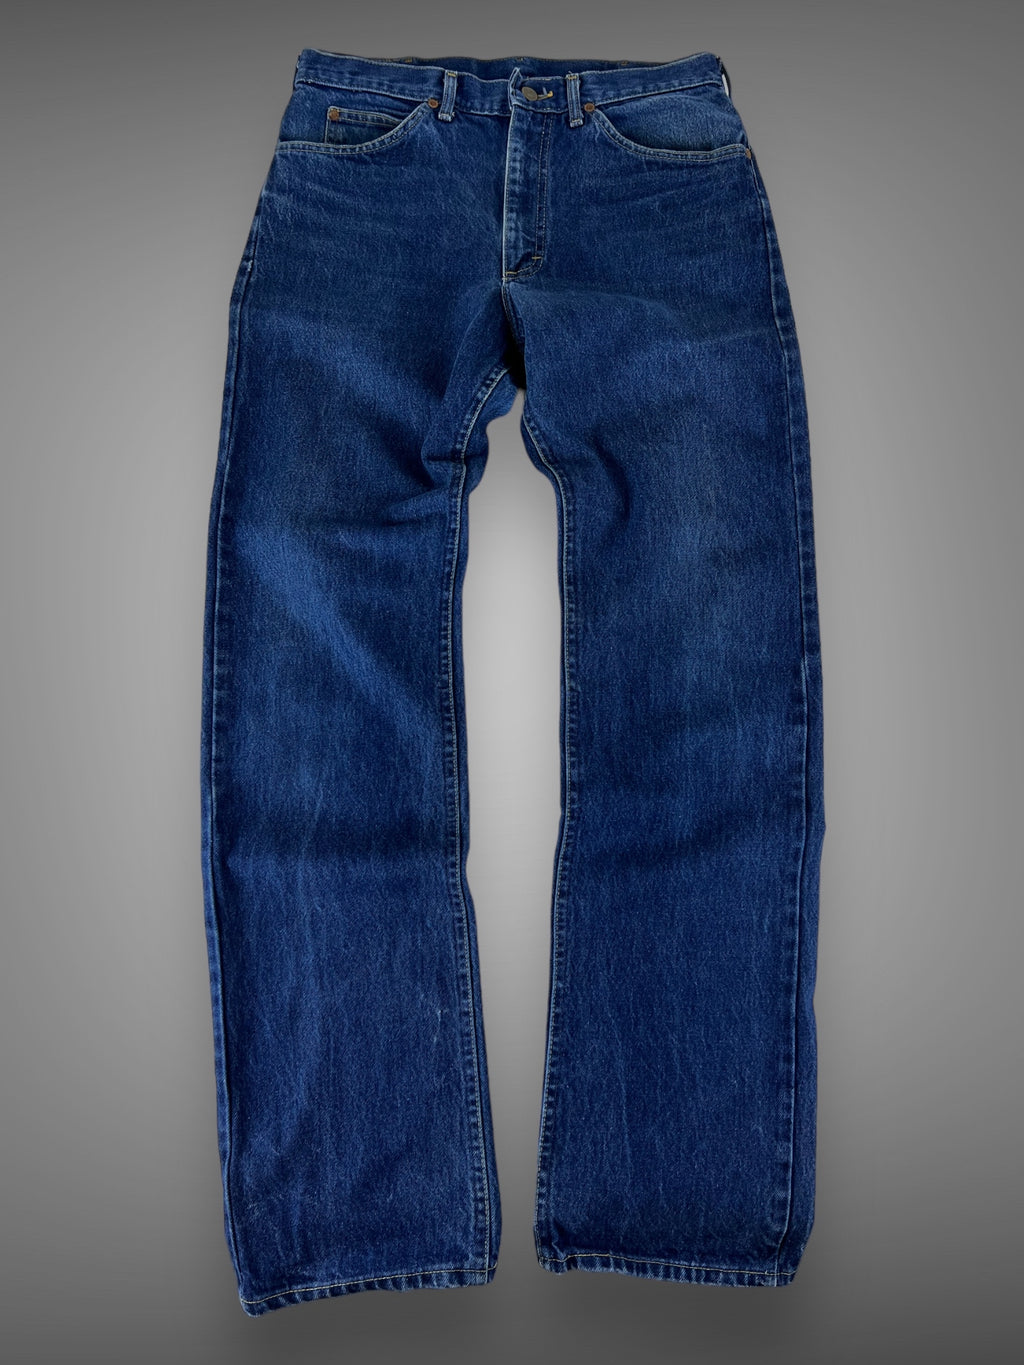 Union made Lee Riders jeans 32x33”